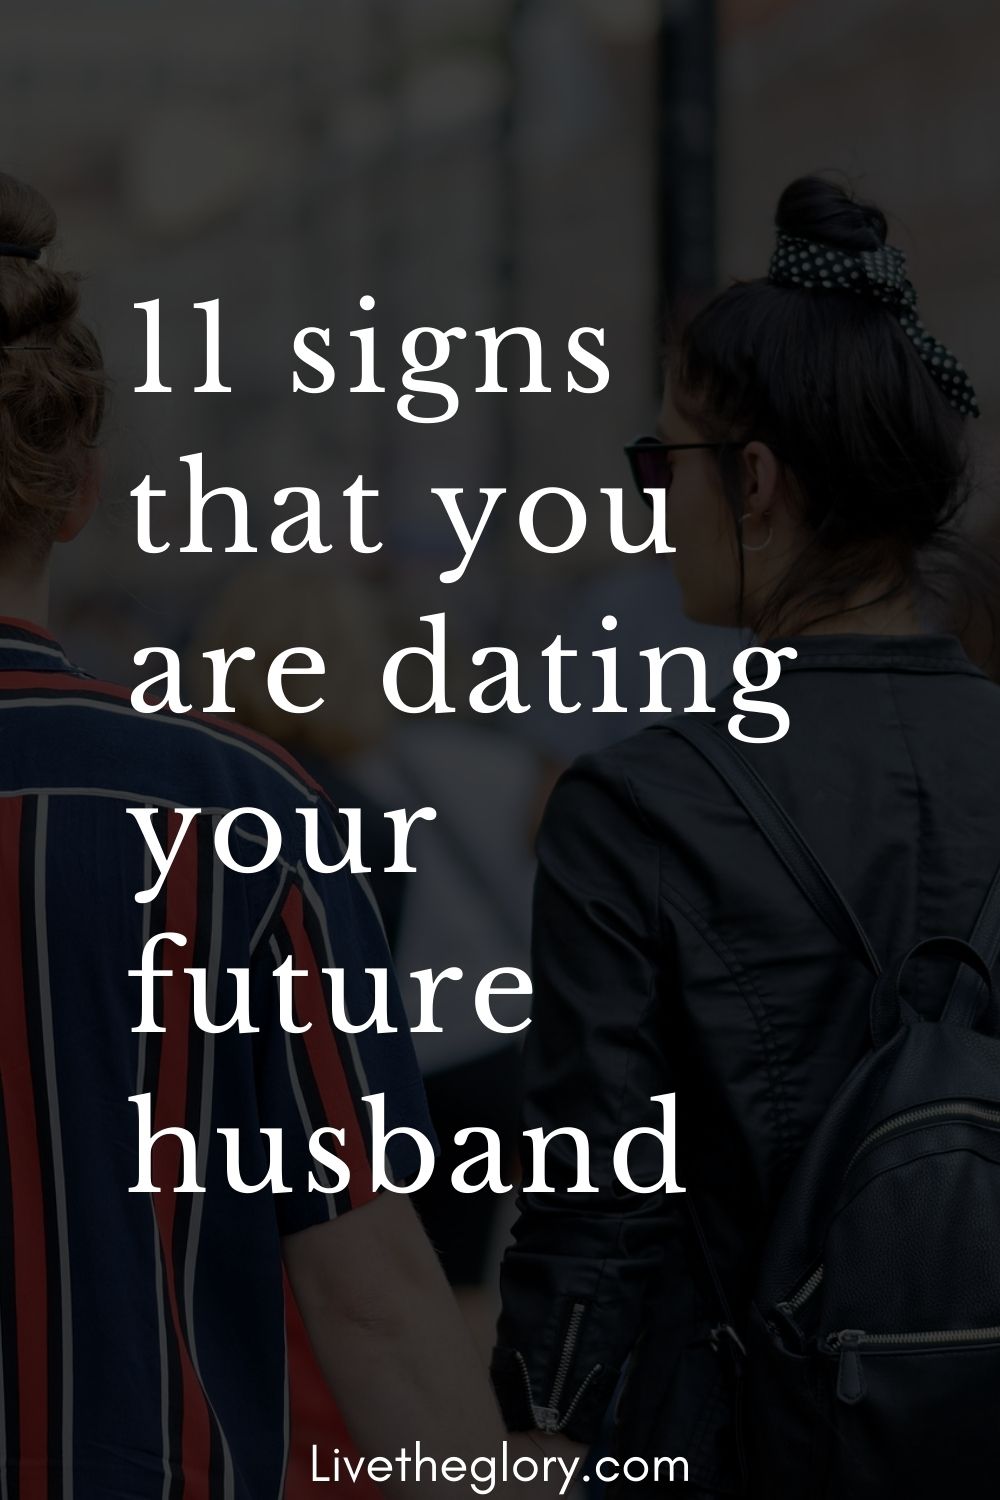 11 signs that you are dating your future husband - Live the glory